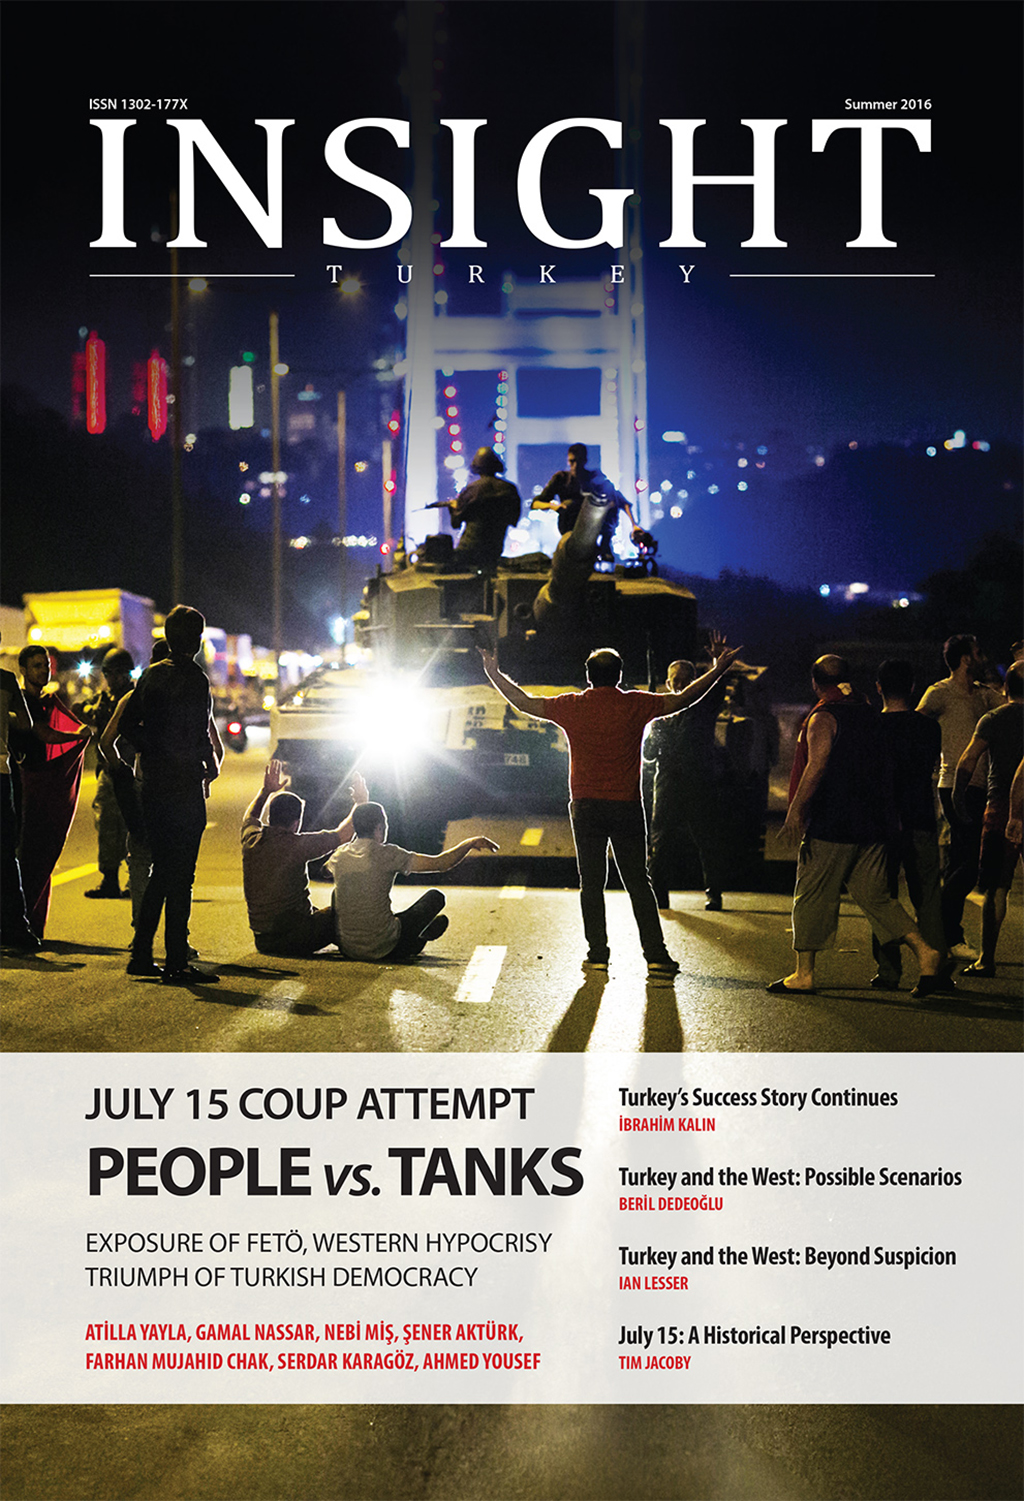 July 15 Coup Attempt People vs Tanks